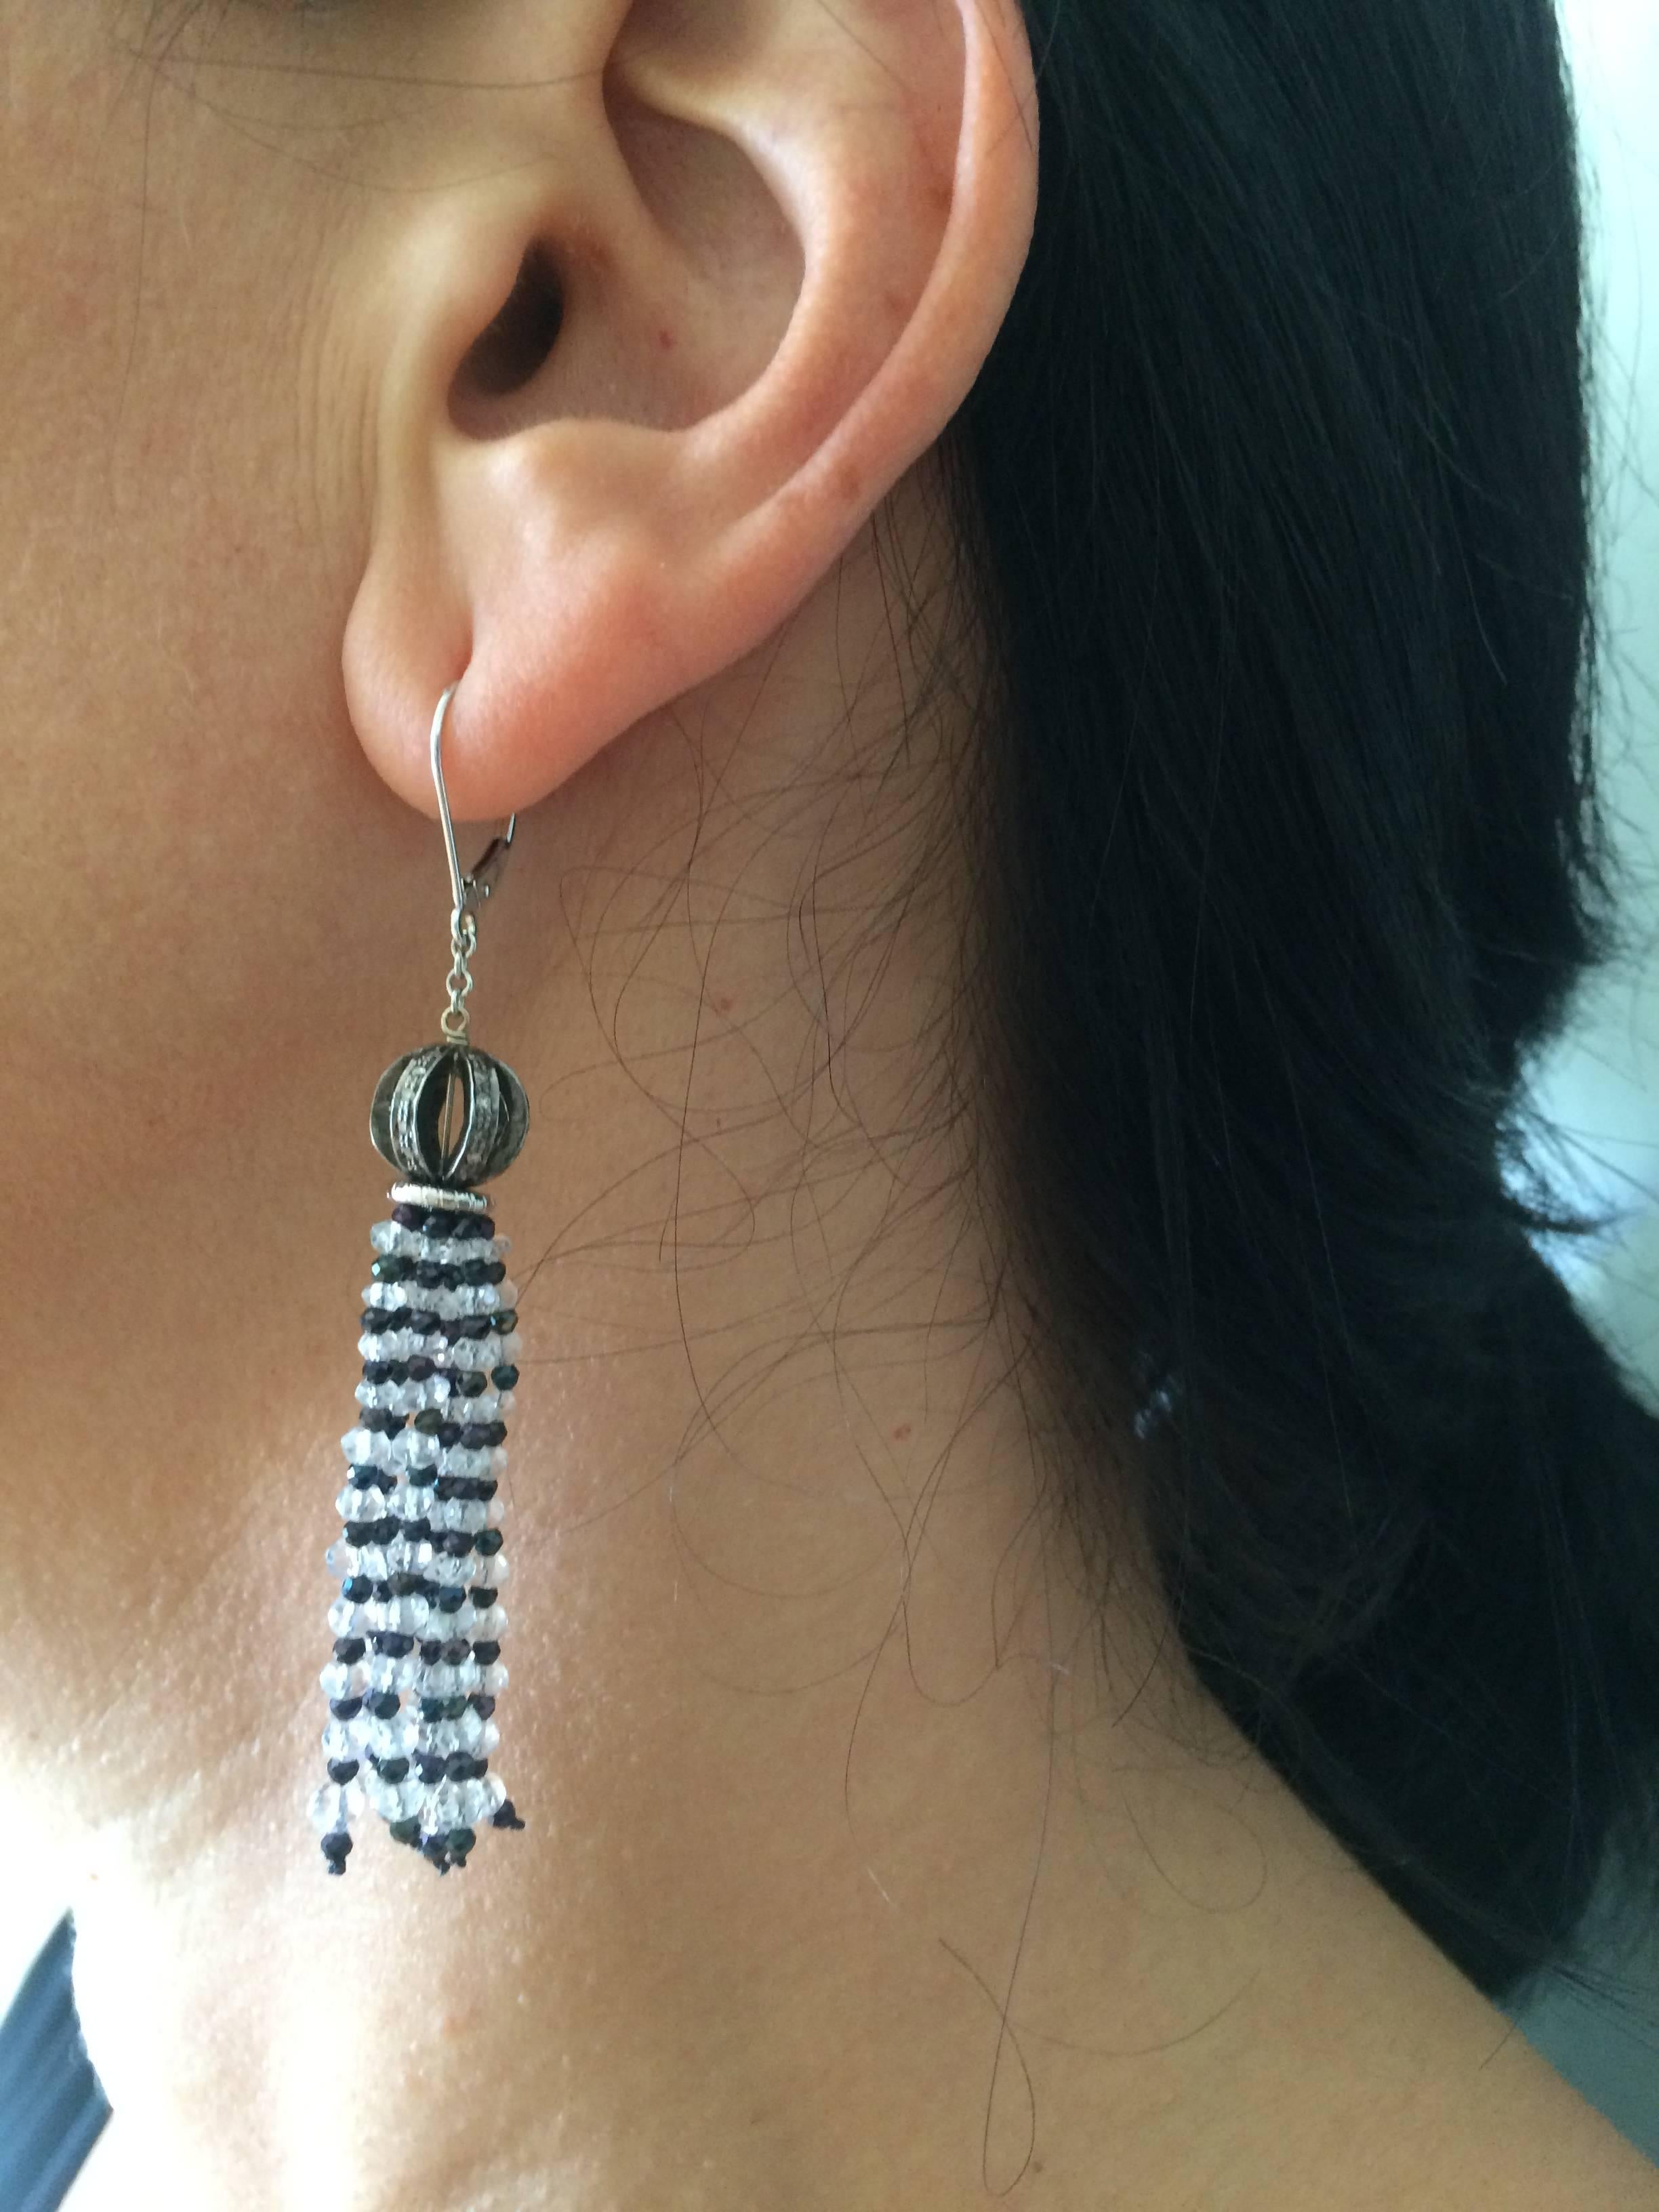 Marina J Diamond Encrusted Ball Earrings with Quartz and Black Spinel Tassels In New Condition For Sale In Los Angeles, CA